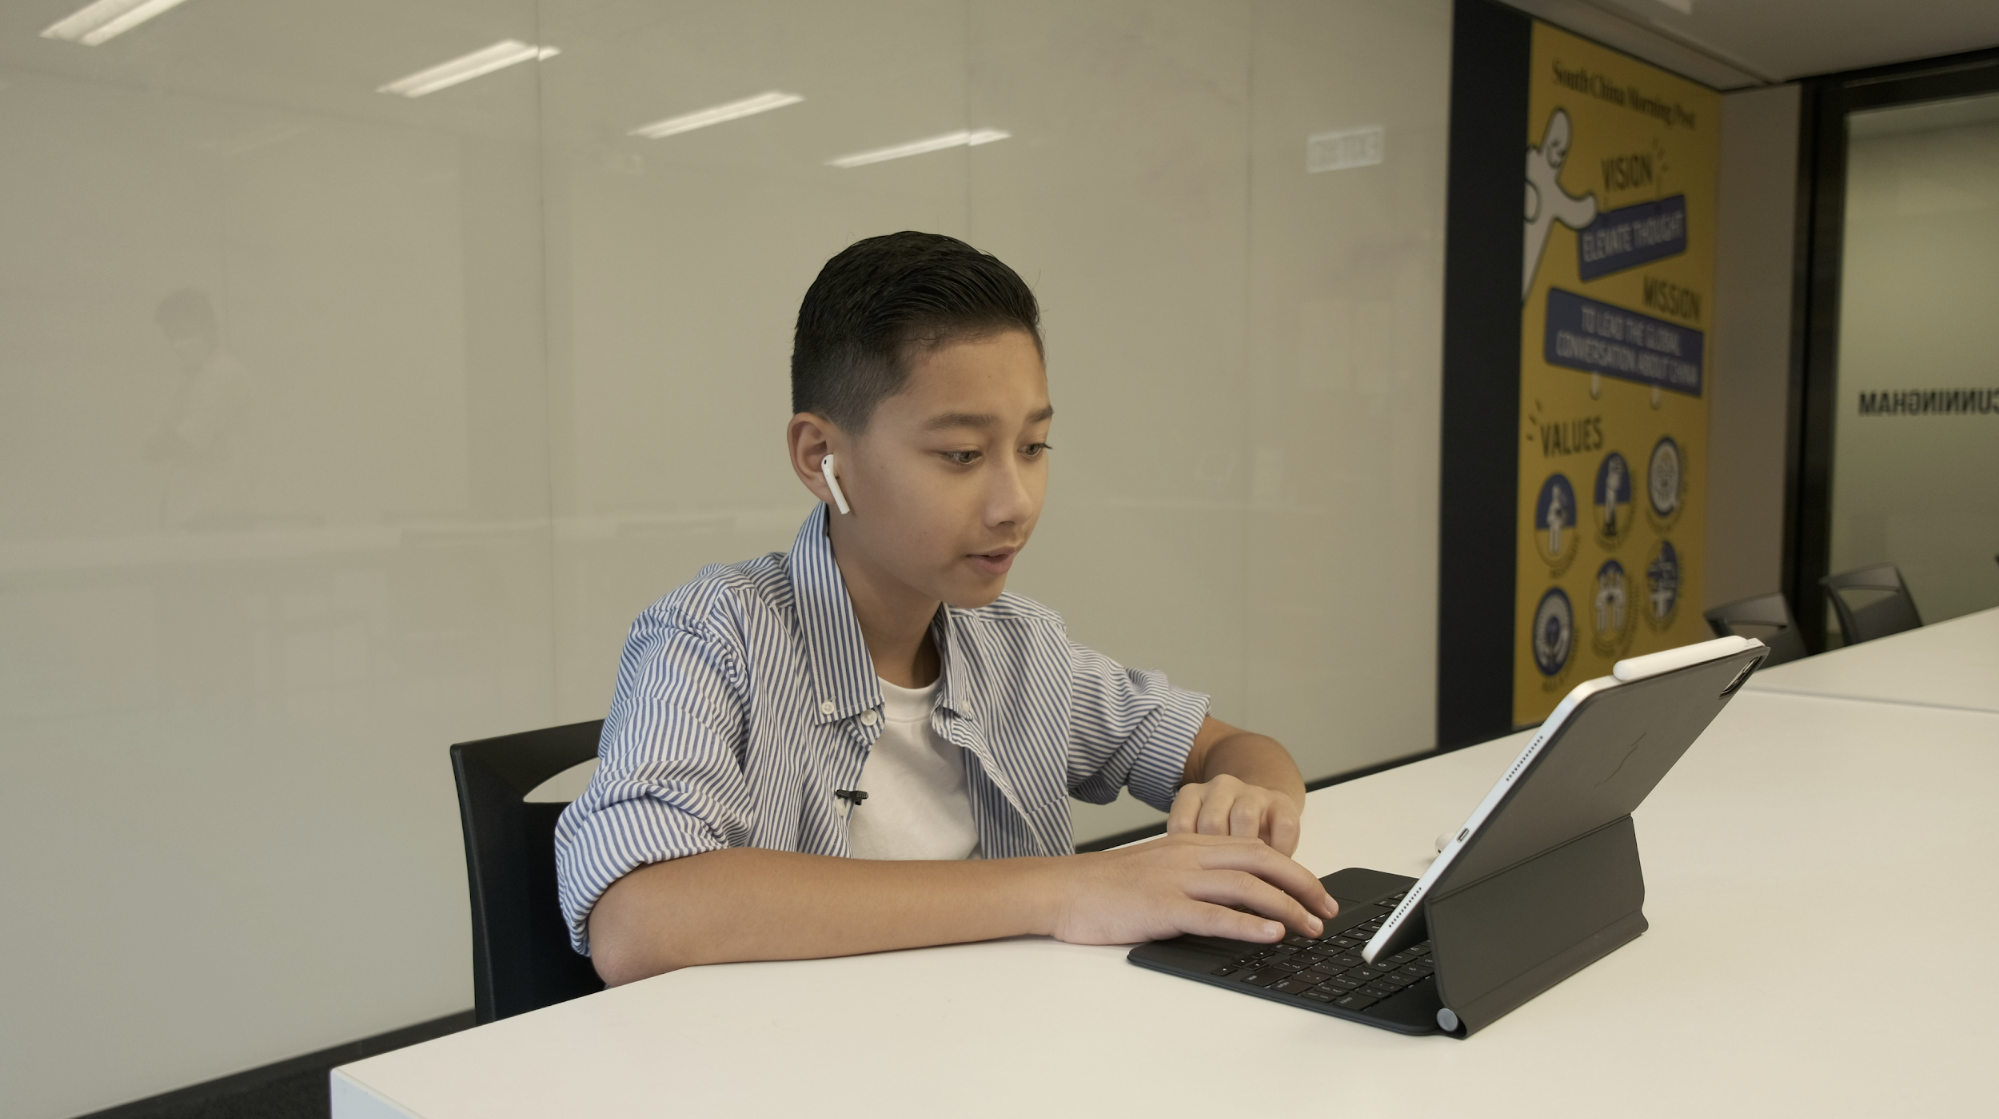 Jacob Prohaska, 12, is a contestant in Apple’s first ever Swift Student Challenge. (Picture: Chris Chang/Abacus)